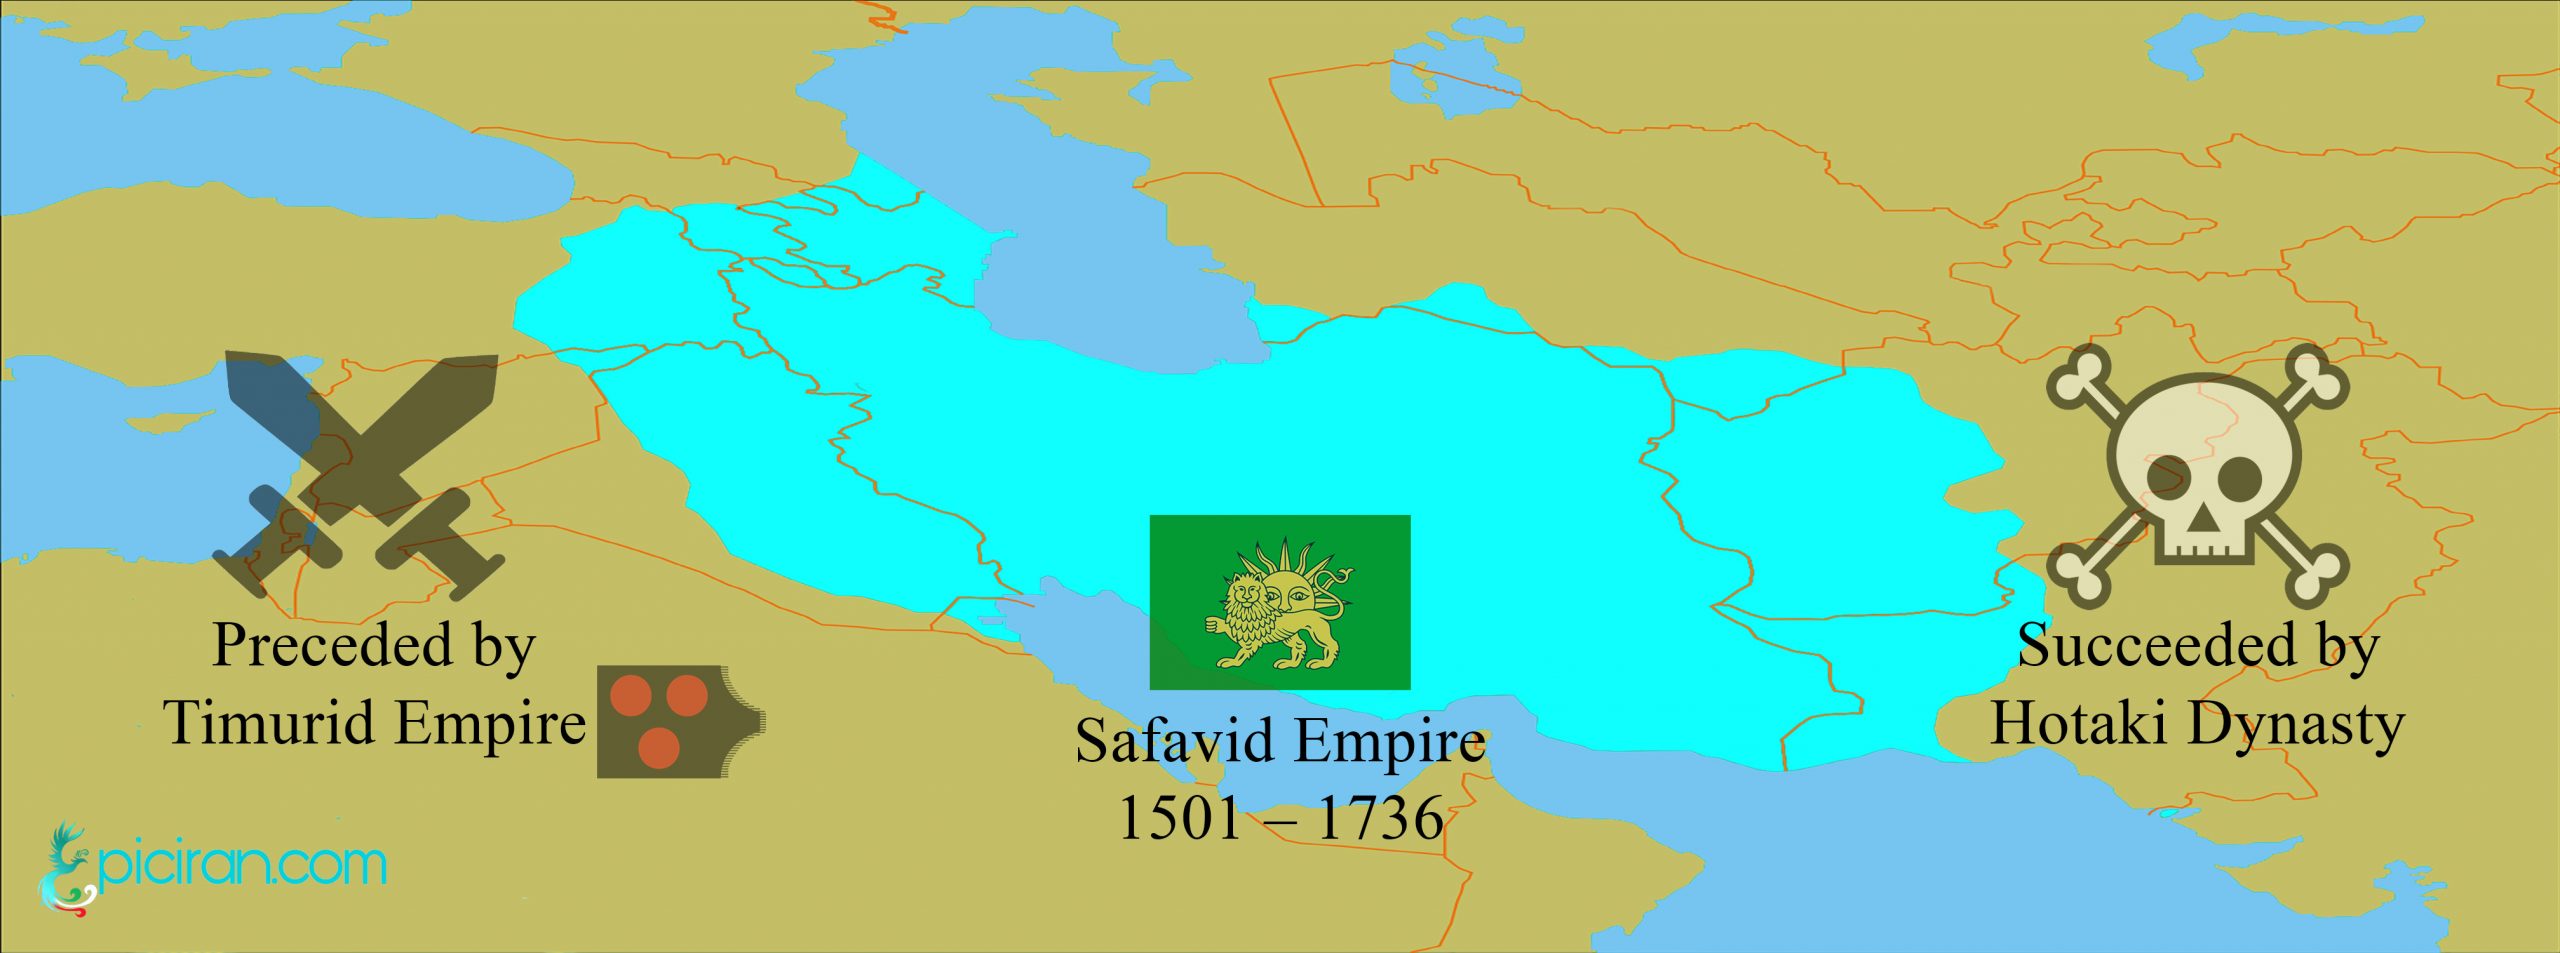 Safavid Empire – The period of conversion of Iranians to Shiites